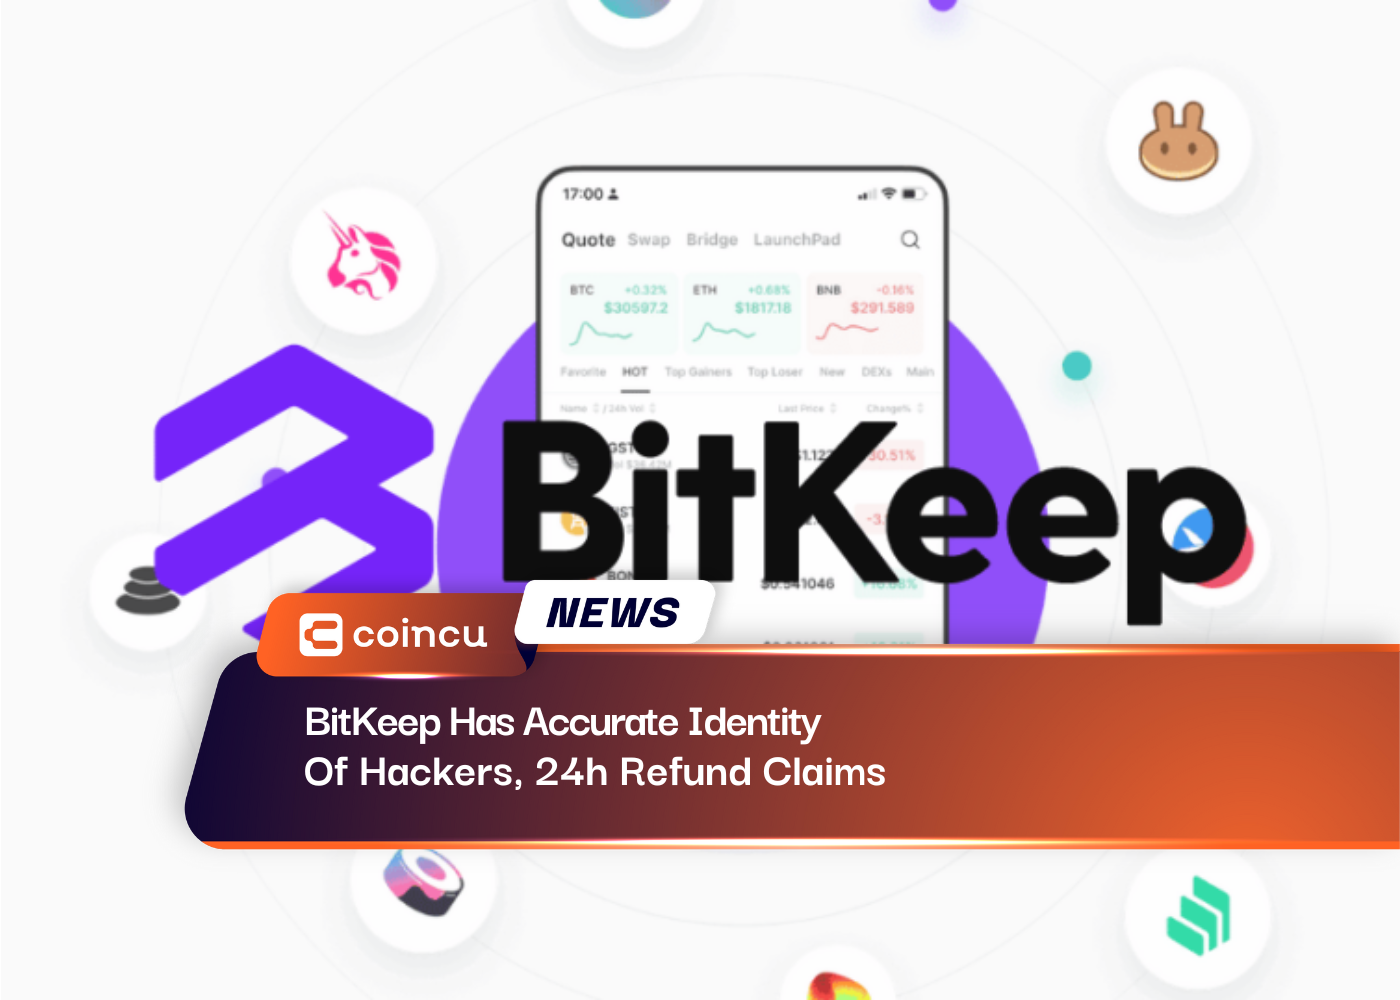 BitKeep Has Accurate Identity Of Hackers, 24h Refund Claims